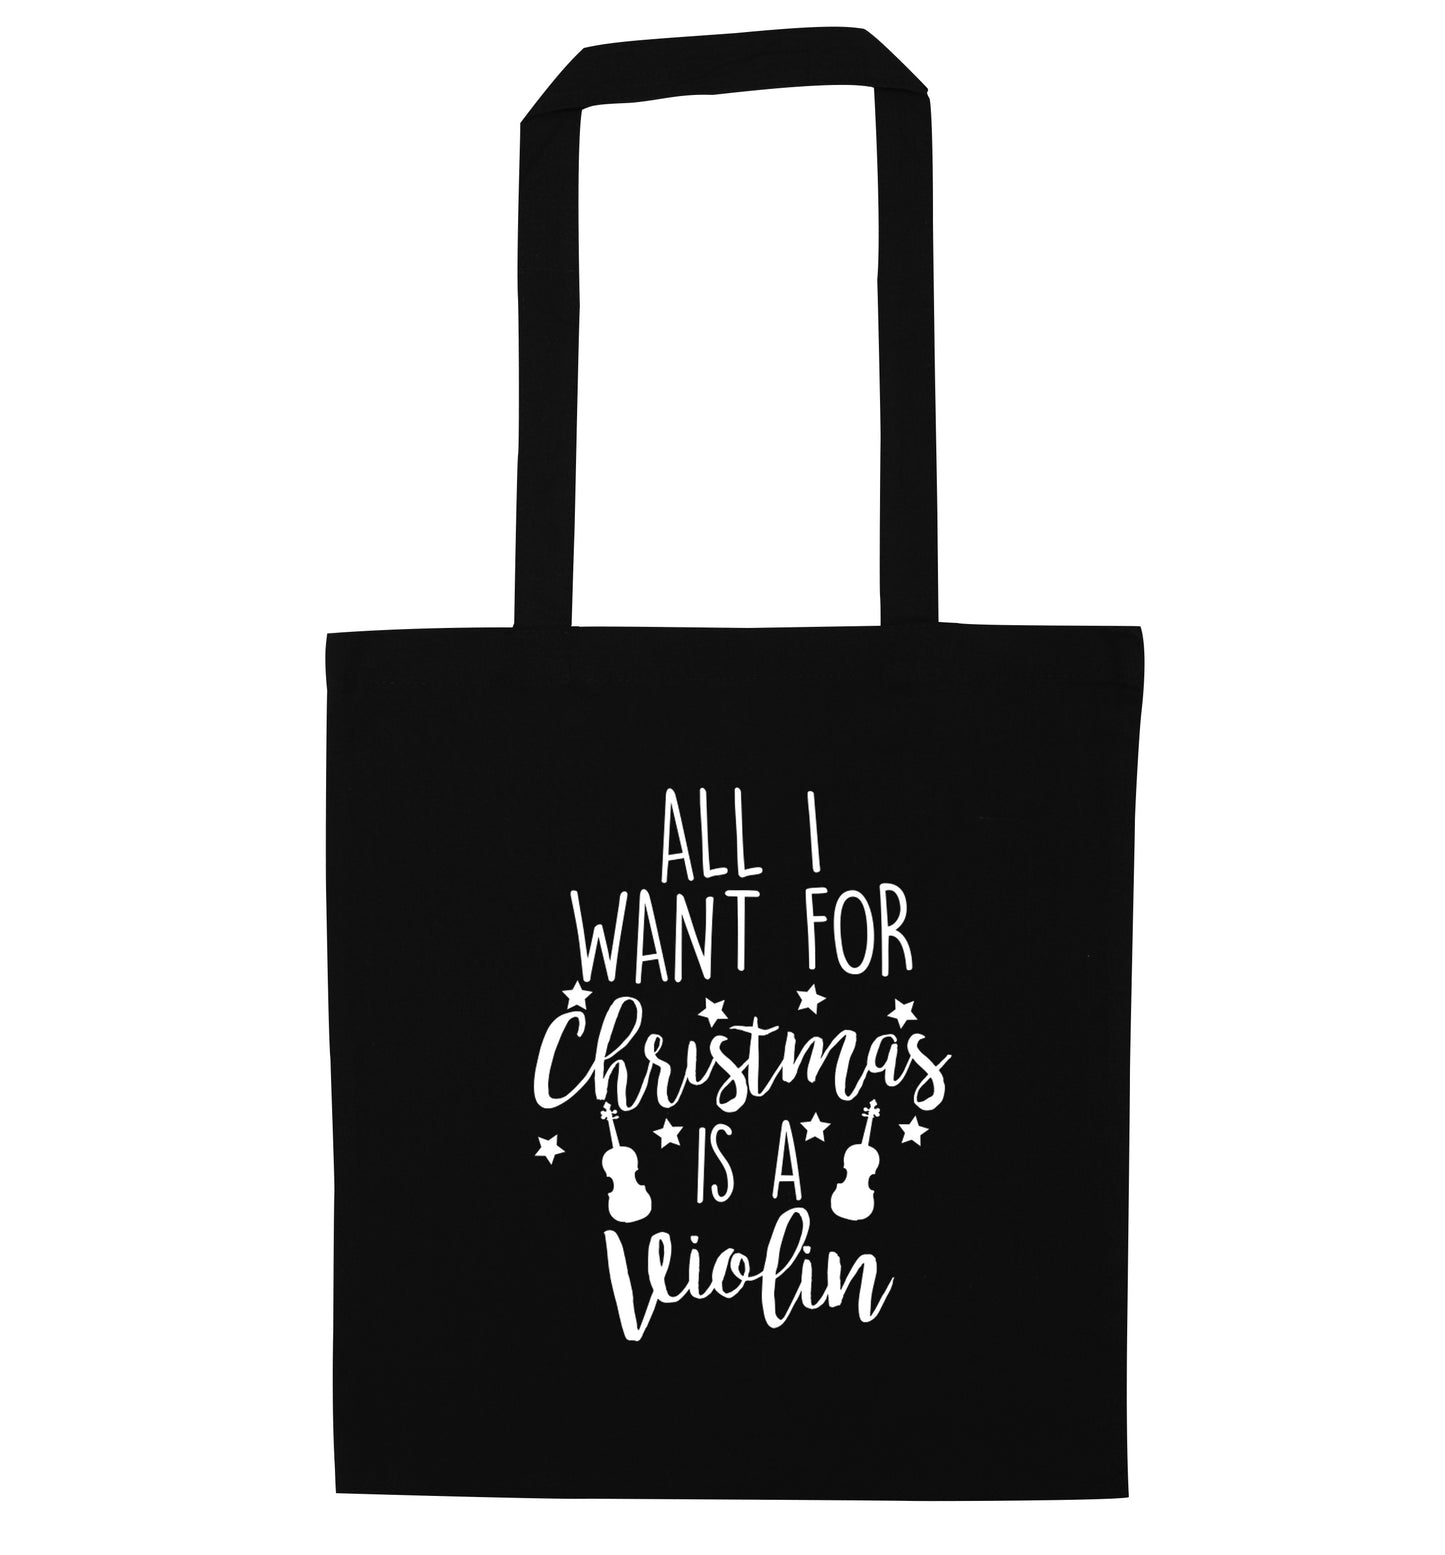 All I Want For Christmas is a Violin black tote bag